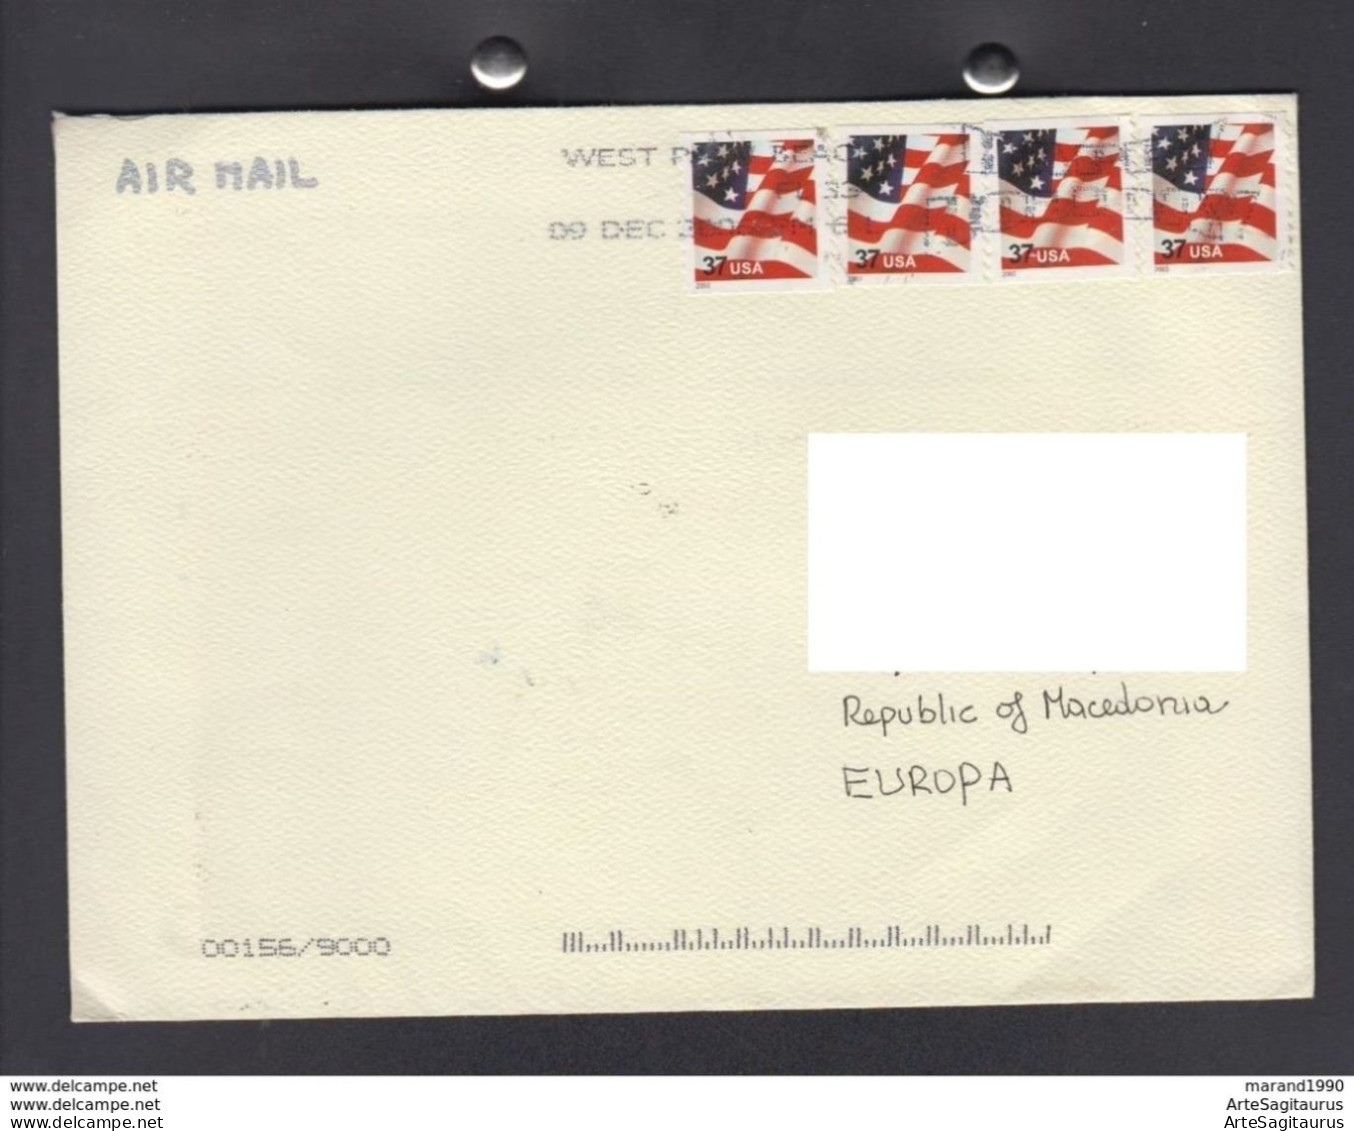 USA, COVER, AIR MAIL, FLAGS, REPUBLIC OF MACEDONIA  (008) - Enveloppes